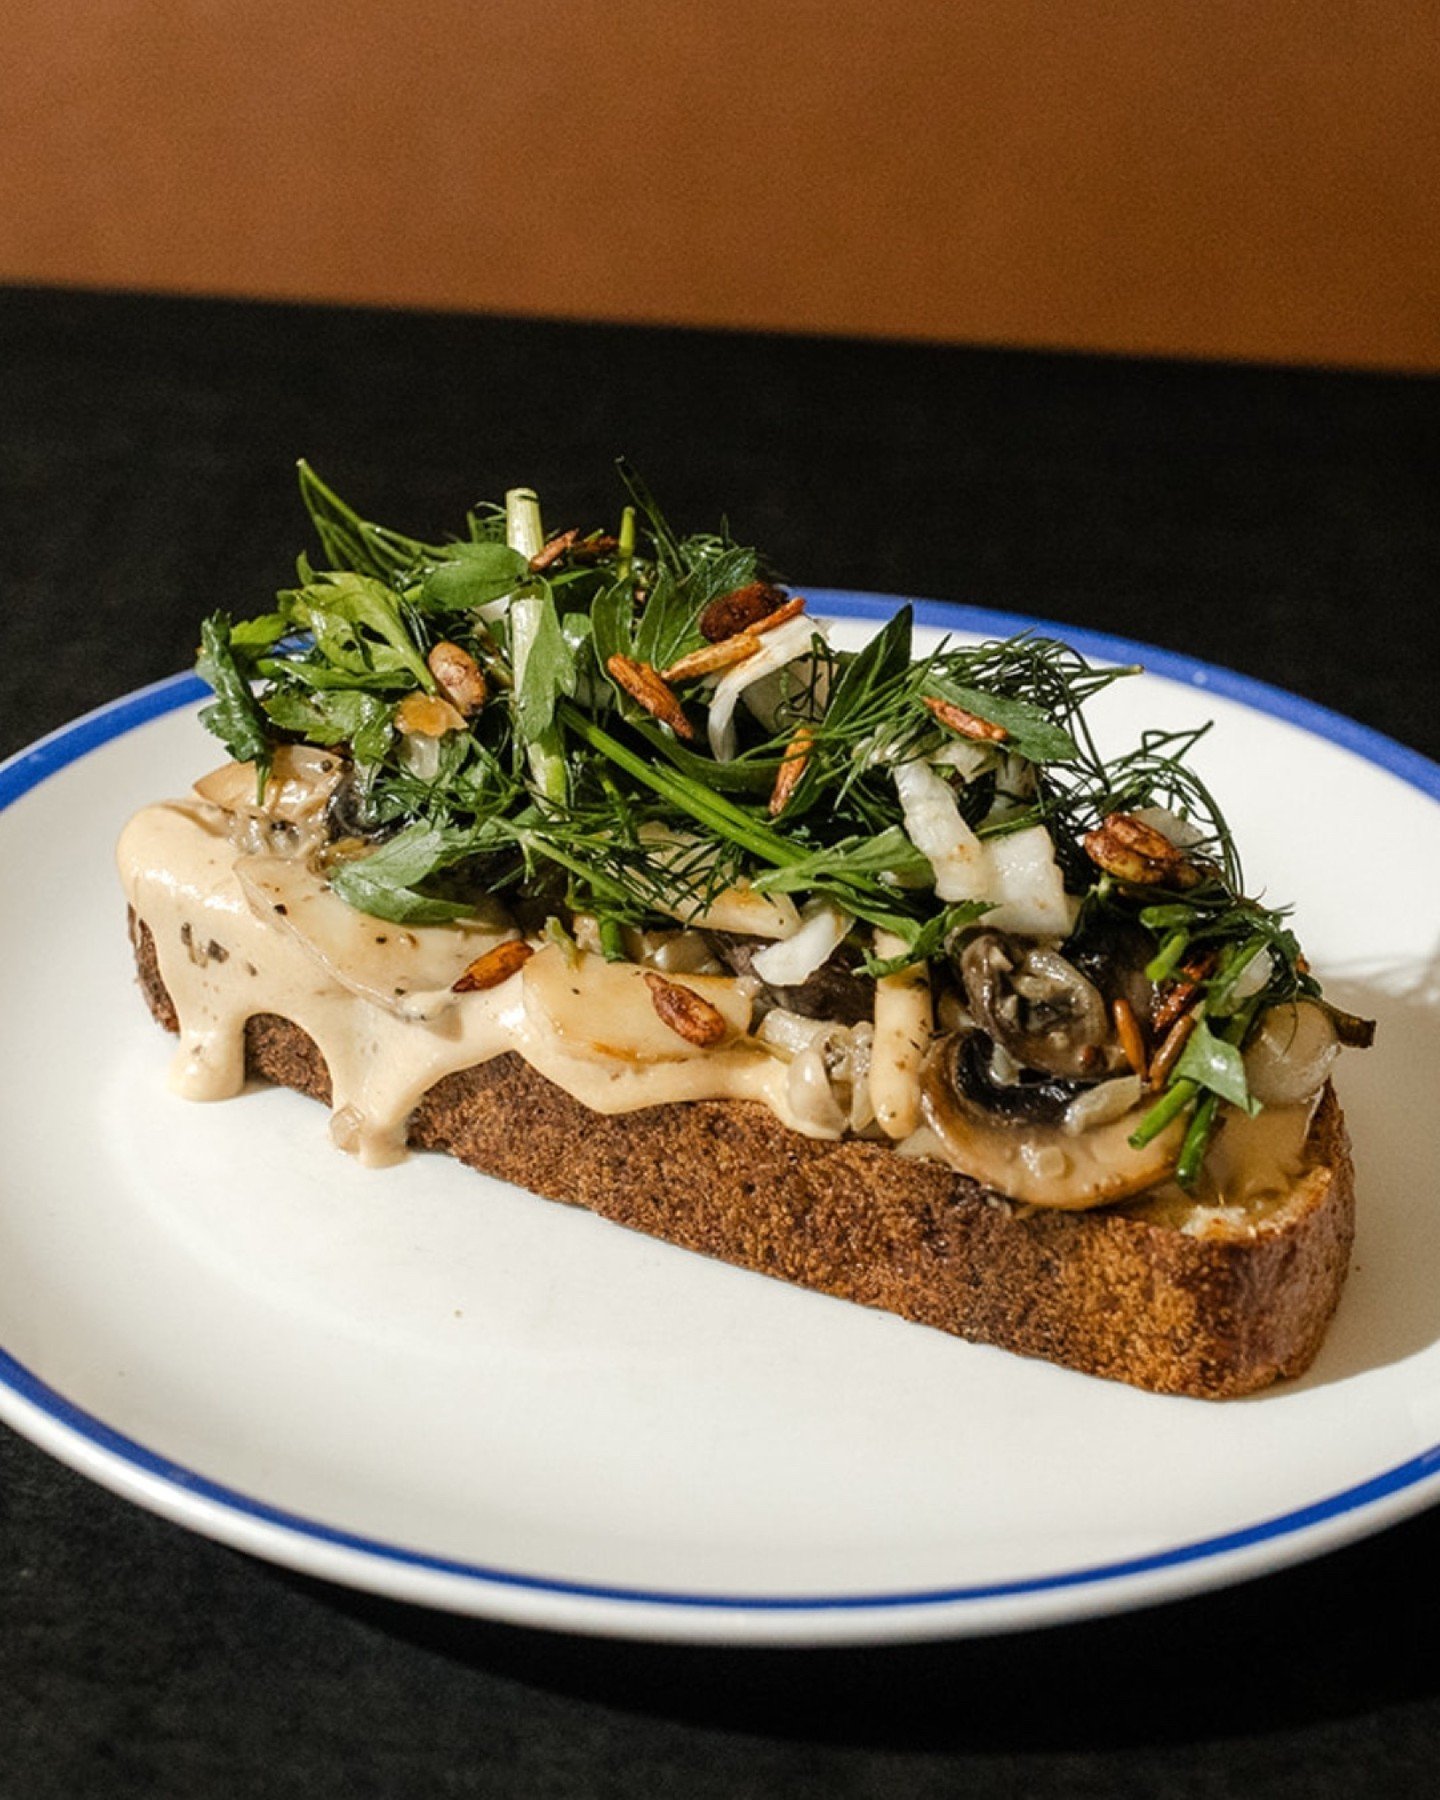 The saut&eacute;ed mushroom medley on the Mushroom Tartine is something else. It's breakfast, it's lunch, it's the perfect warm &amp; creamy flavours. Topped with a herb salad to freshen the palate.